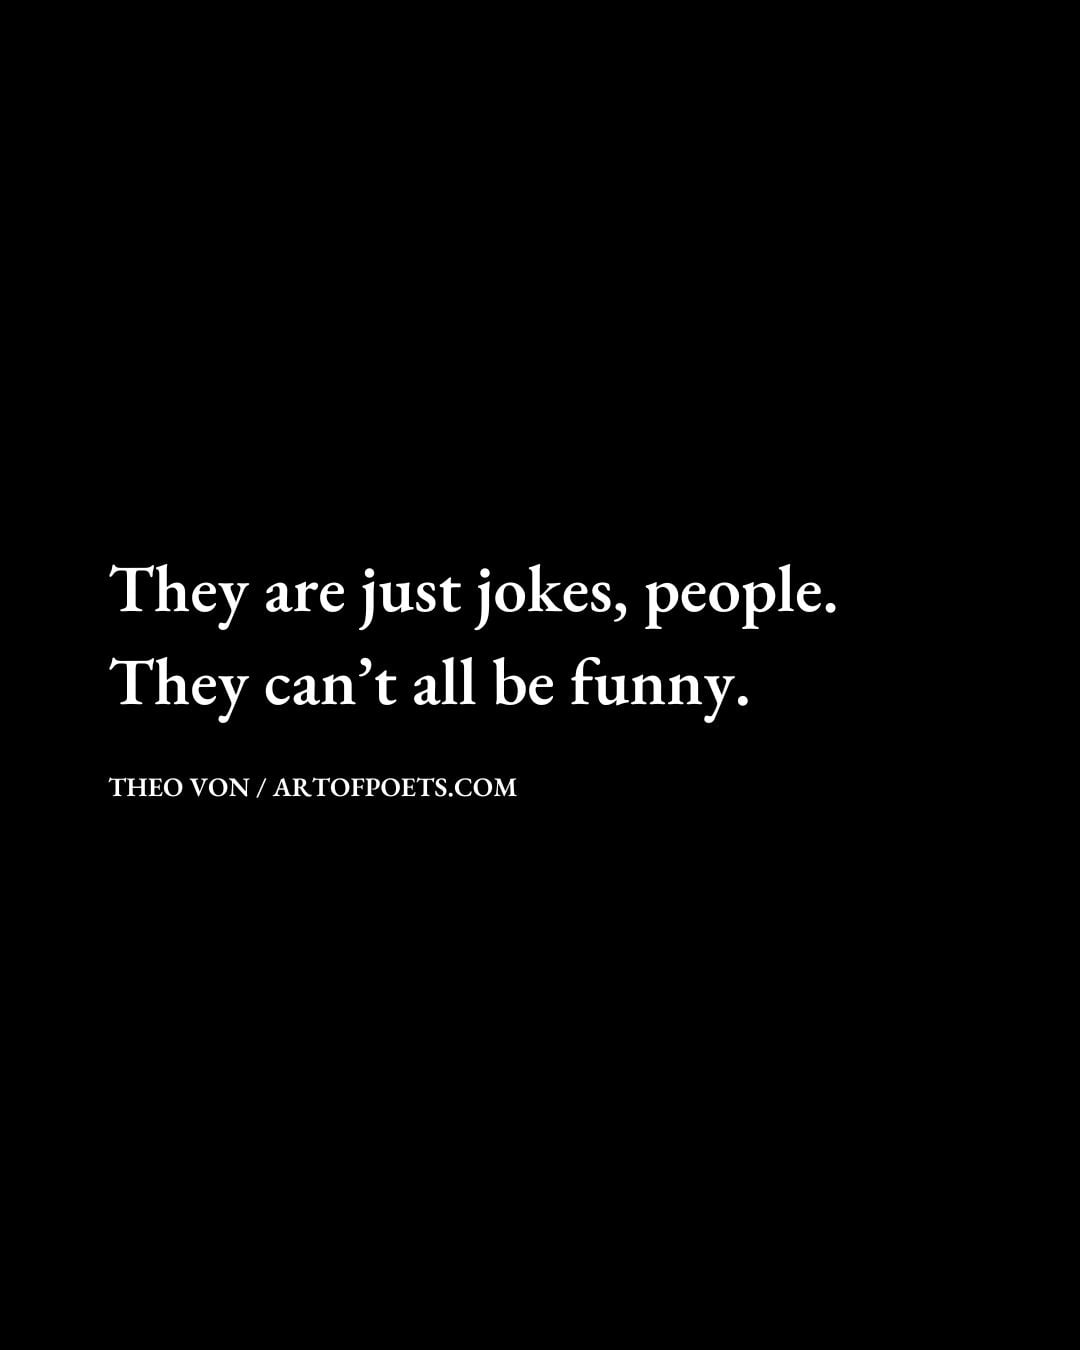 Theyre just jokes people. They cant all be funny